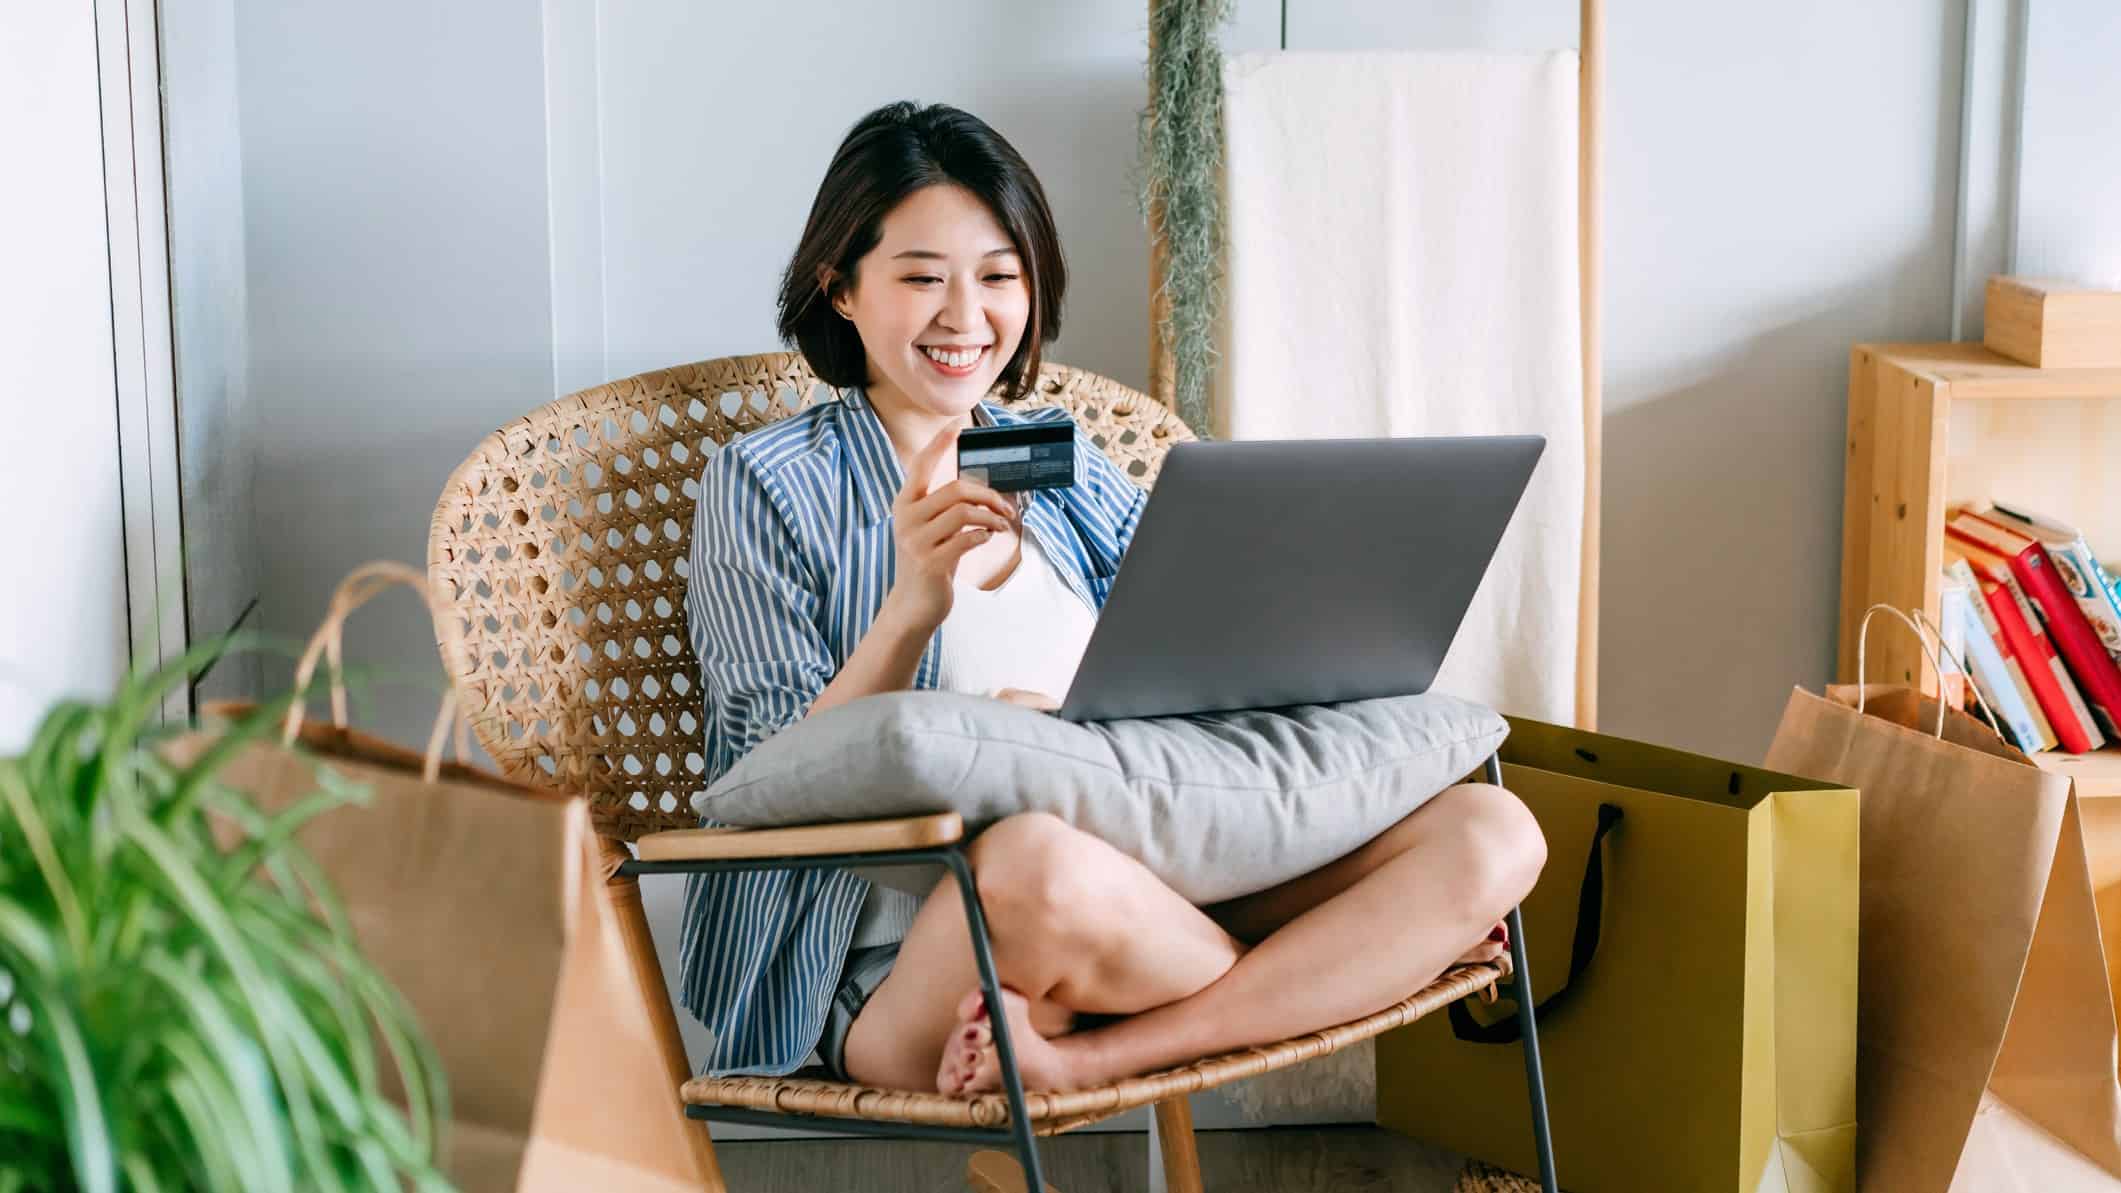 A woman sits on a chair smiling as she shops online. using buy now, pay later services including IOUPay